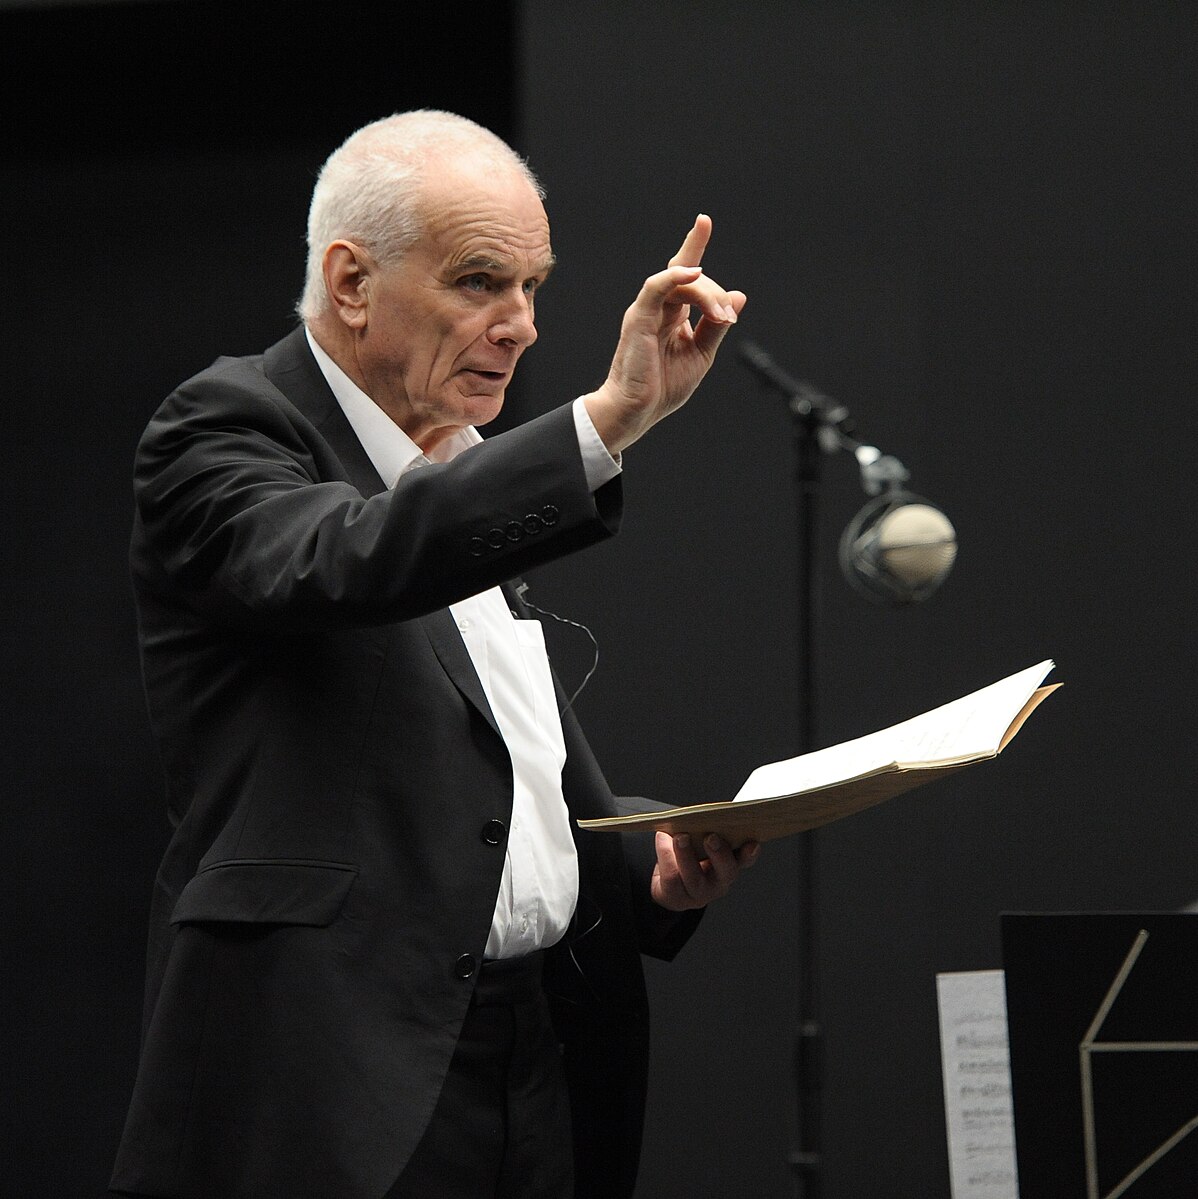 Peter Maxwell Davies holding a score and pointing his finger upward.